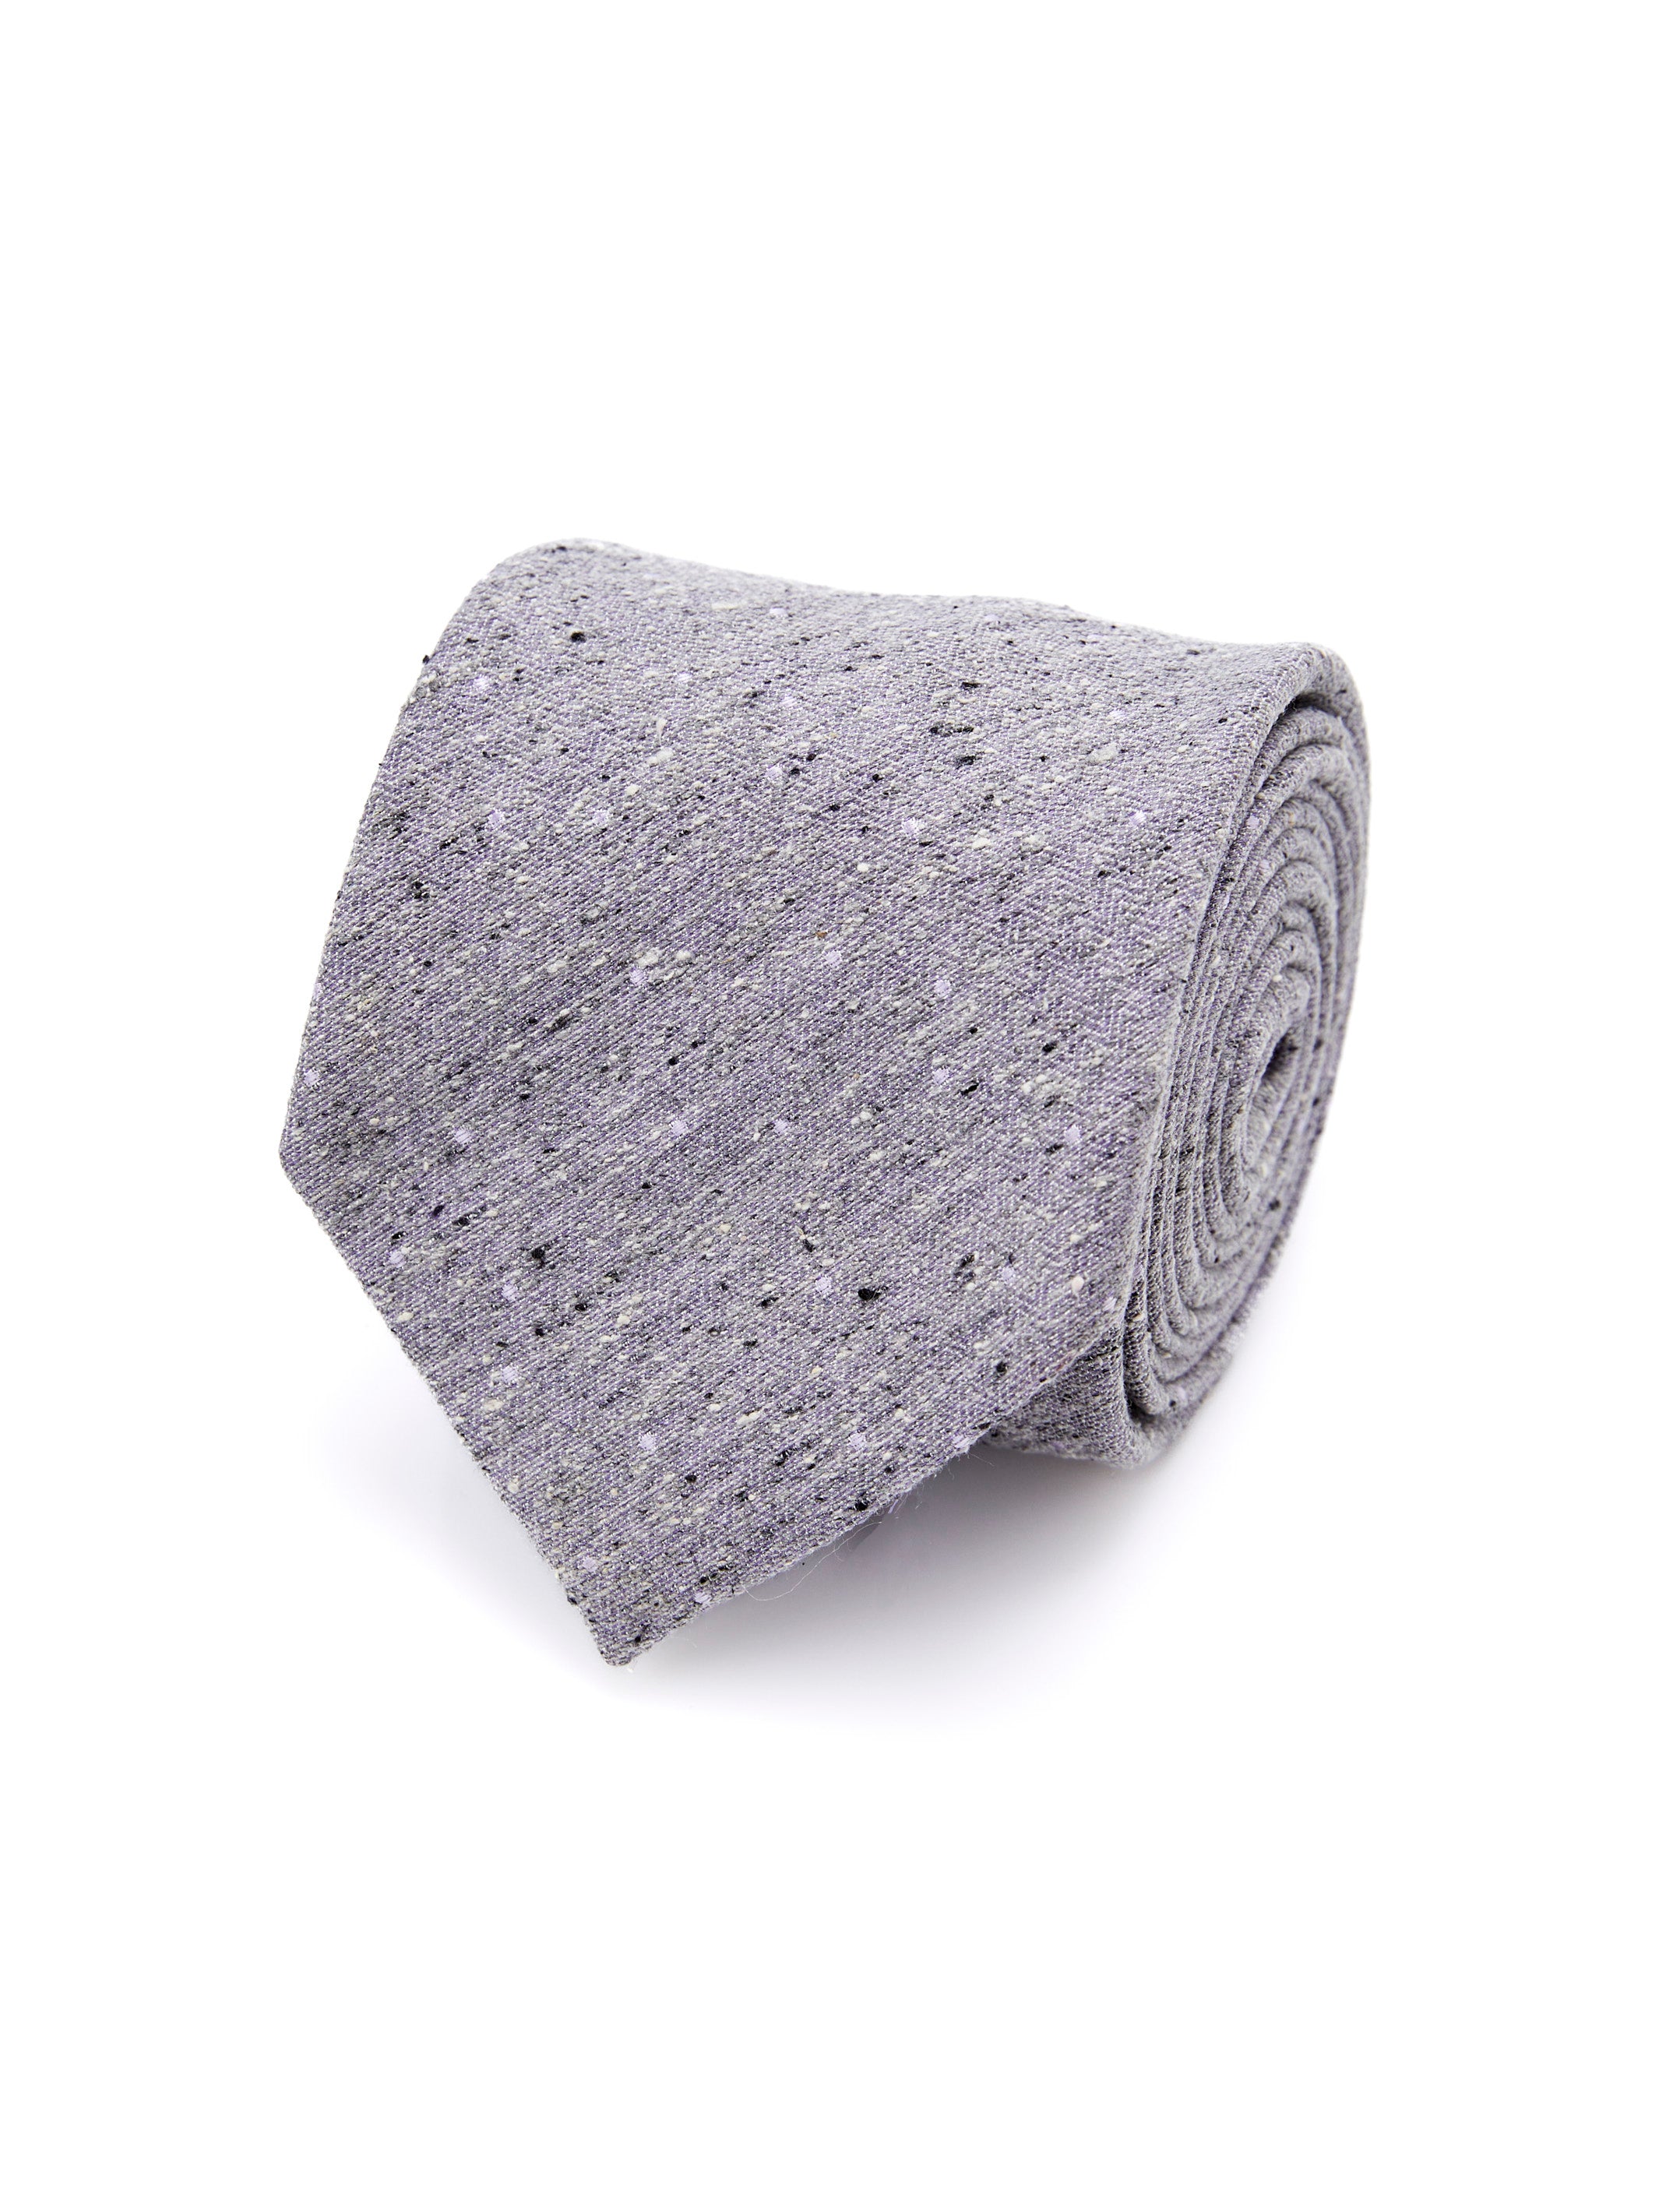 Gray tie textured with black and white